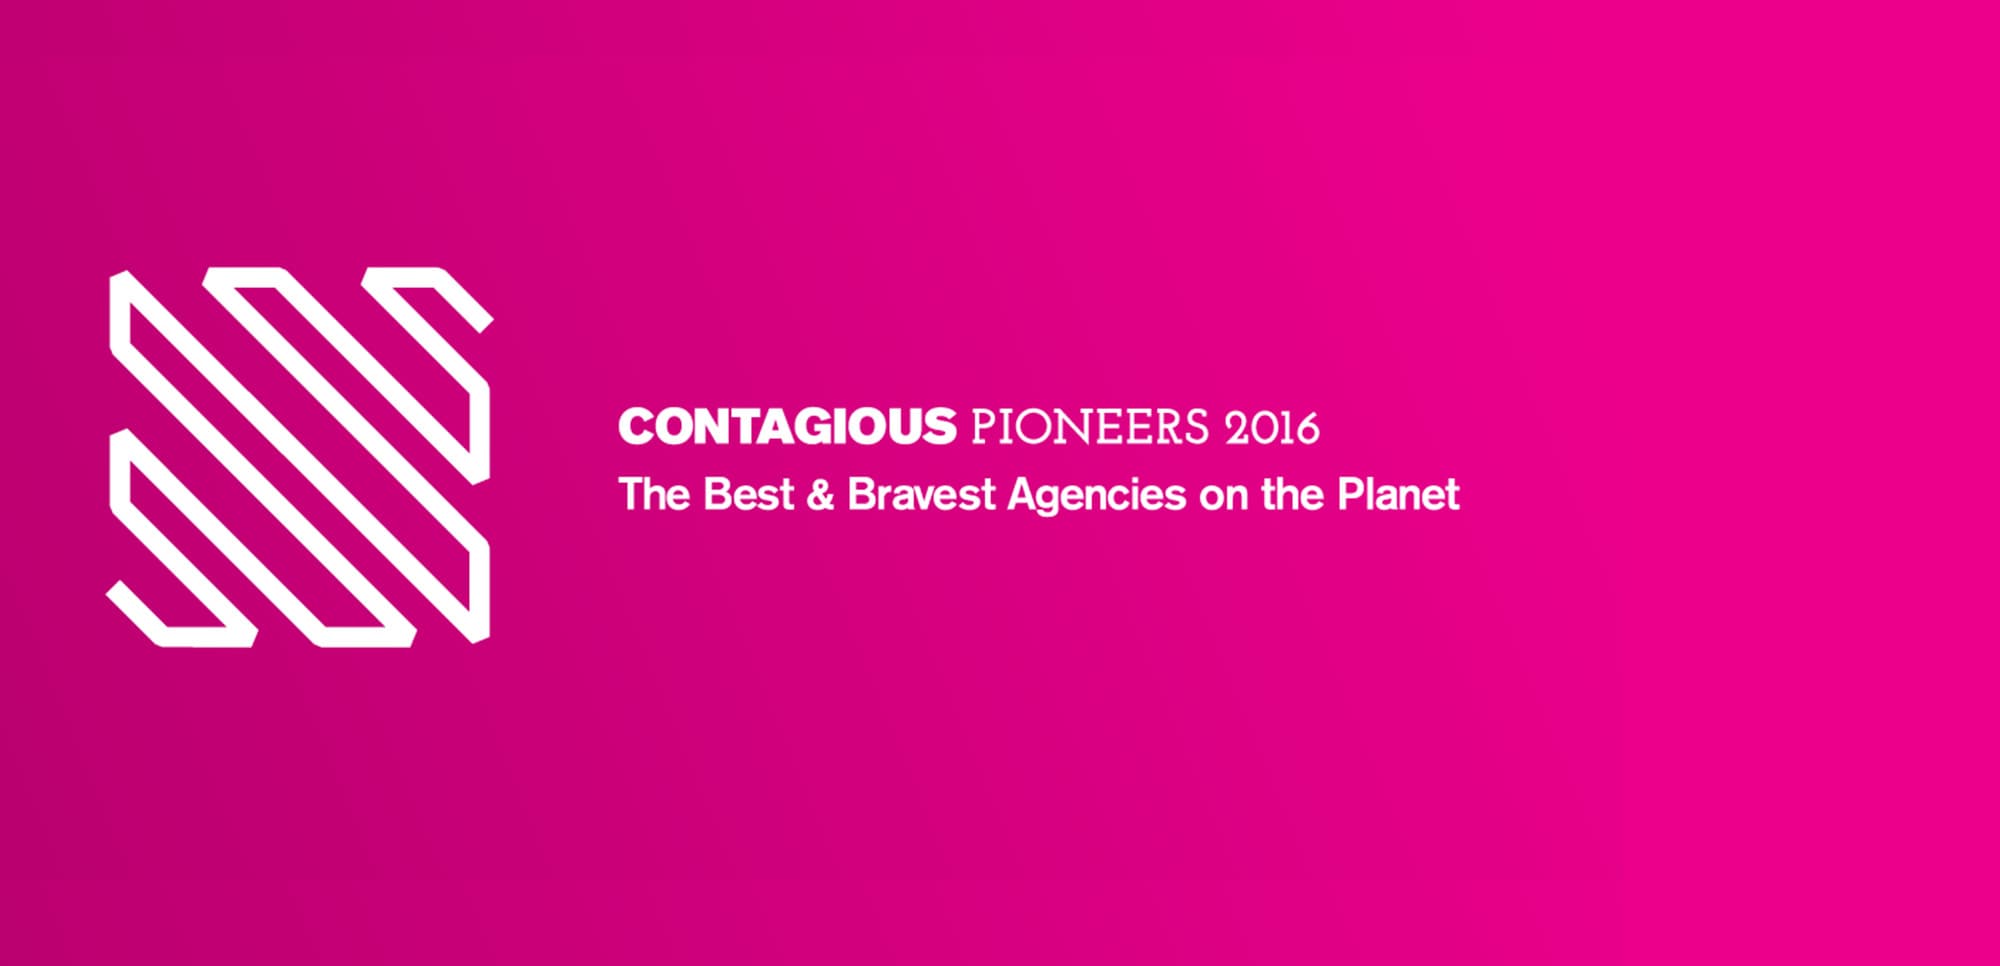 Prime Named to Contagious Pioneers 2016, Honoring the Best and Bravest Agencies in the World